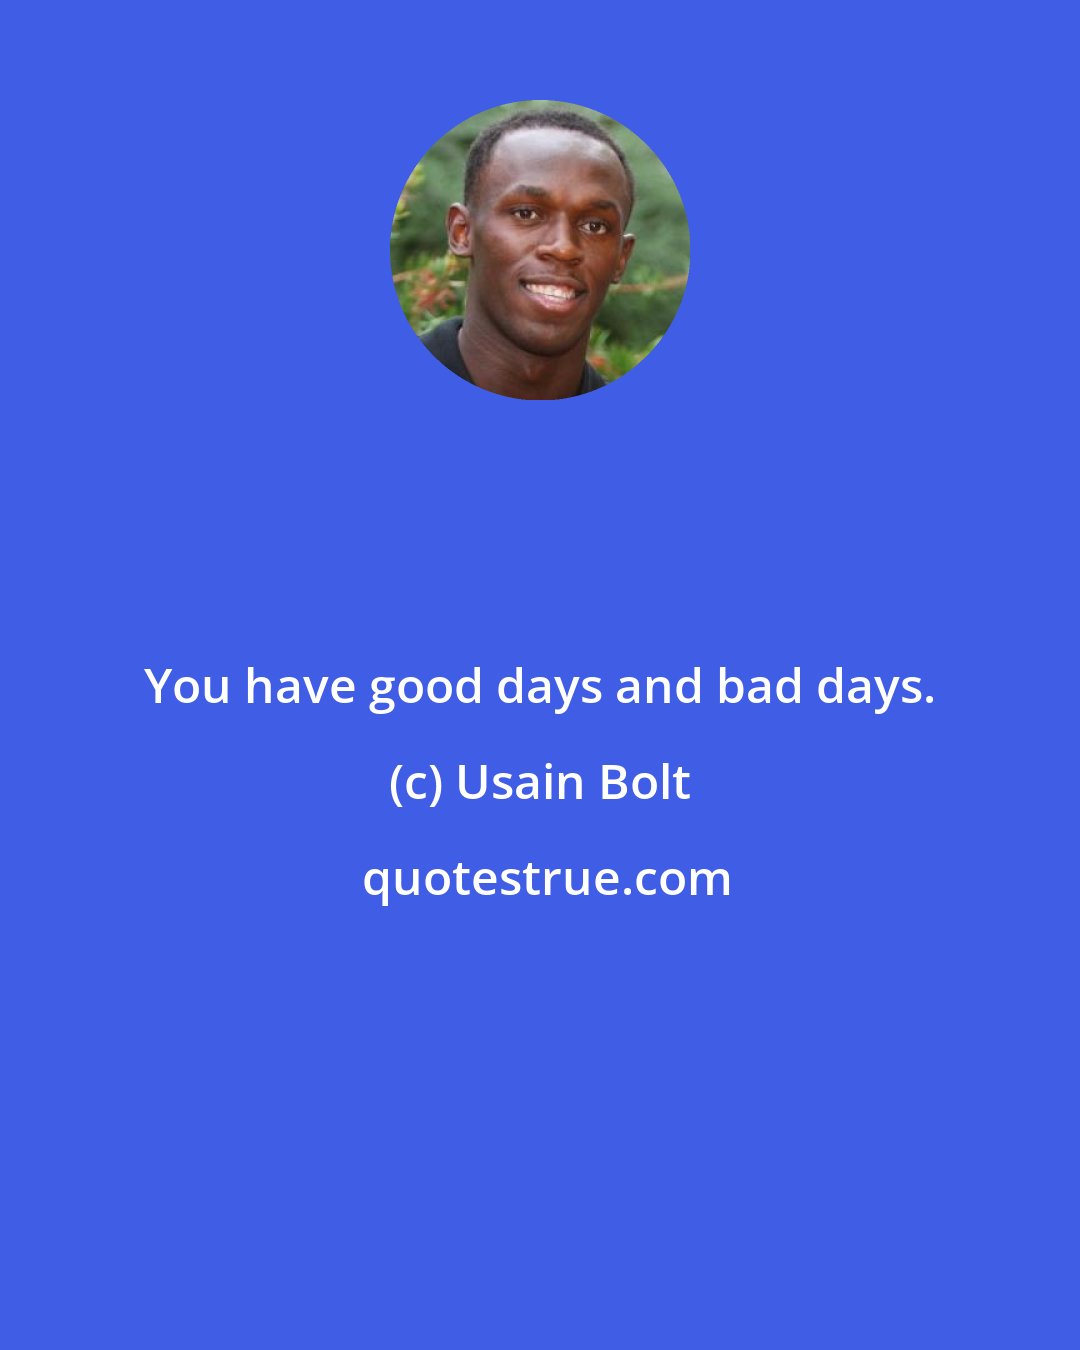 Usain Bolt: You have good days and bad days.